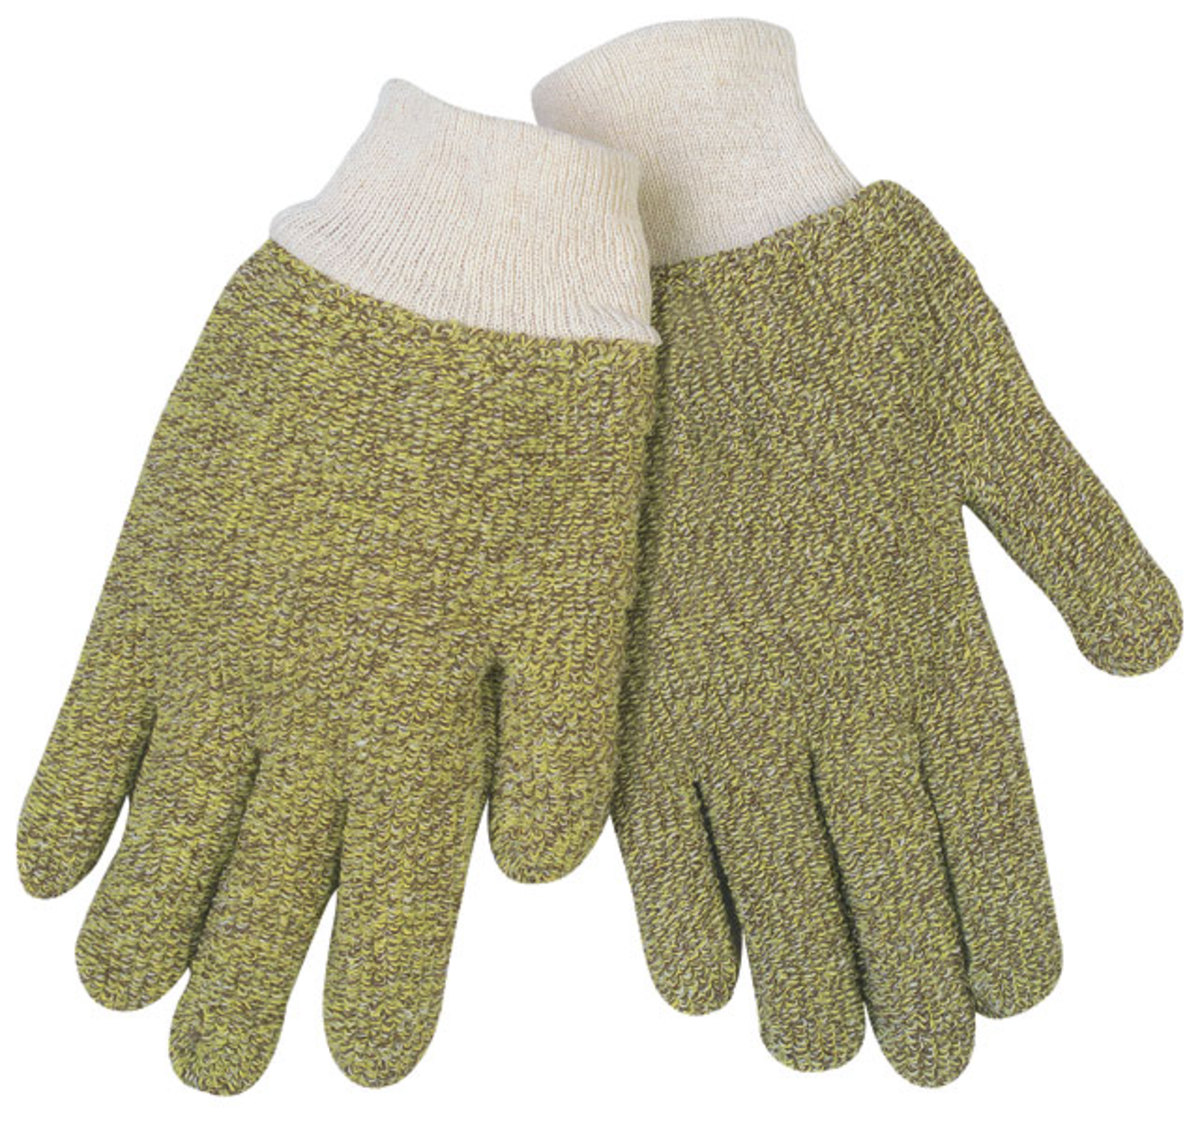 Memphis Glove Large Brown And Yellow Economy Weight Loop-Out Kevlar® Cotton Blend Terry Cloth Heat Resistant Gloves With Knit Wr